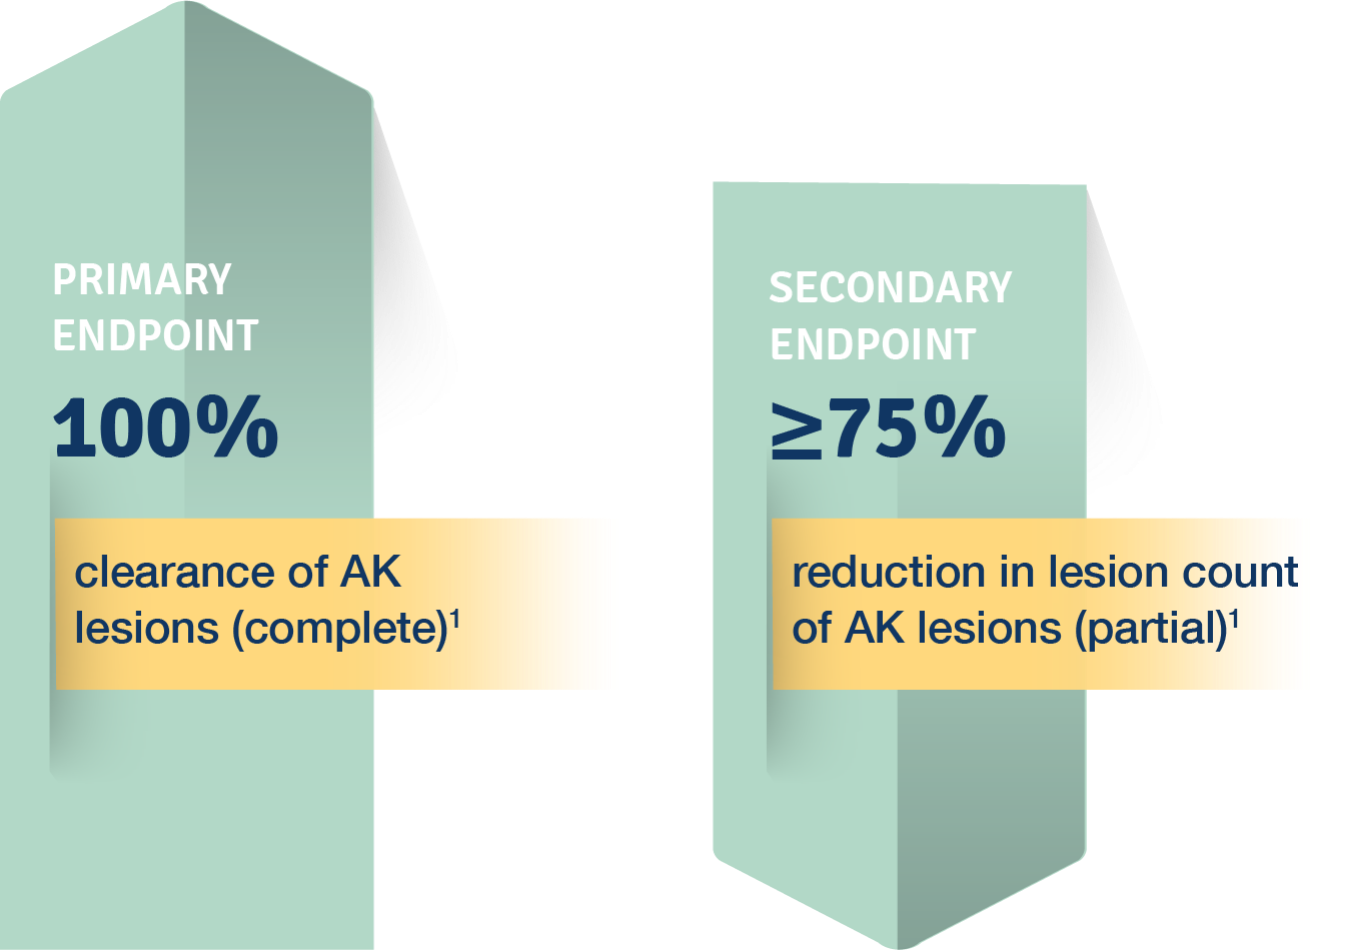 Primary Endpoint 100% clearance of AK lesions (complete)1. Secondary Endpoint greater than or equal to 75% reduction in lesion count of AK lesions (partial)1.